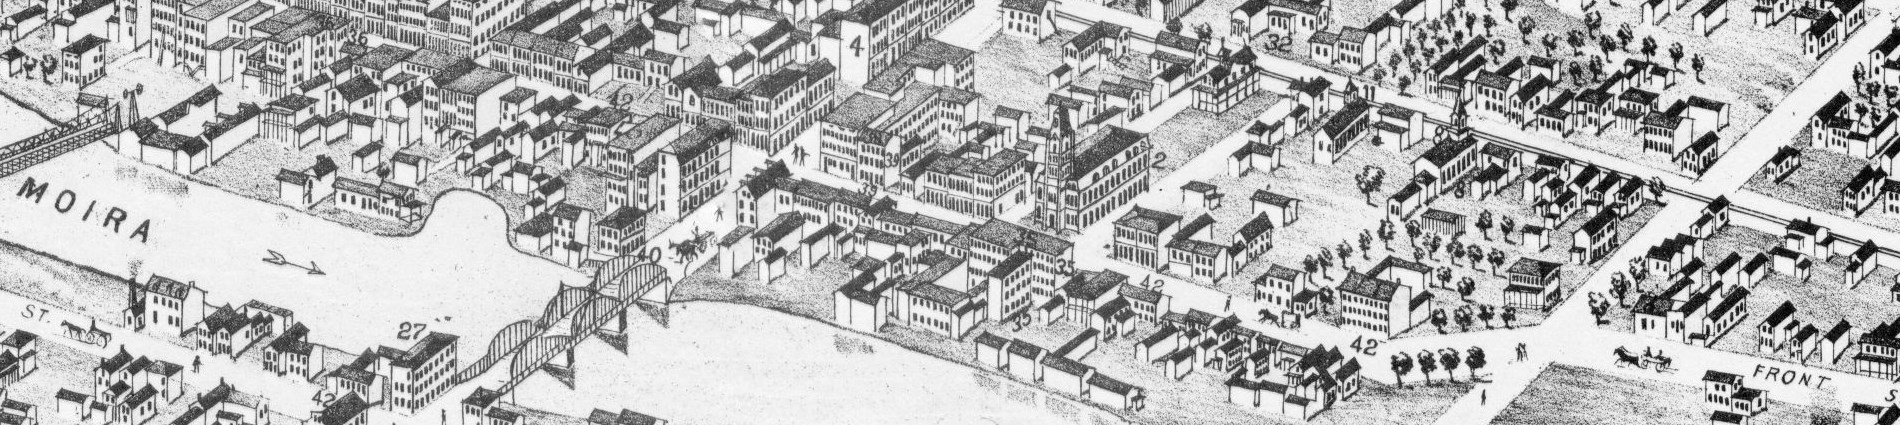 Old mapping layout of Belleville